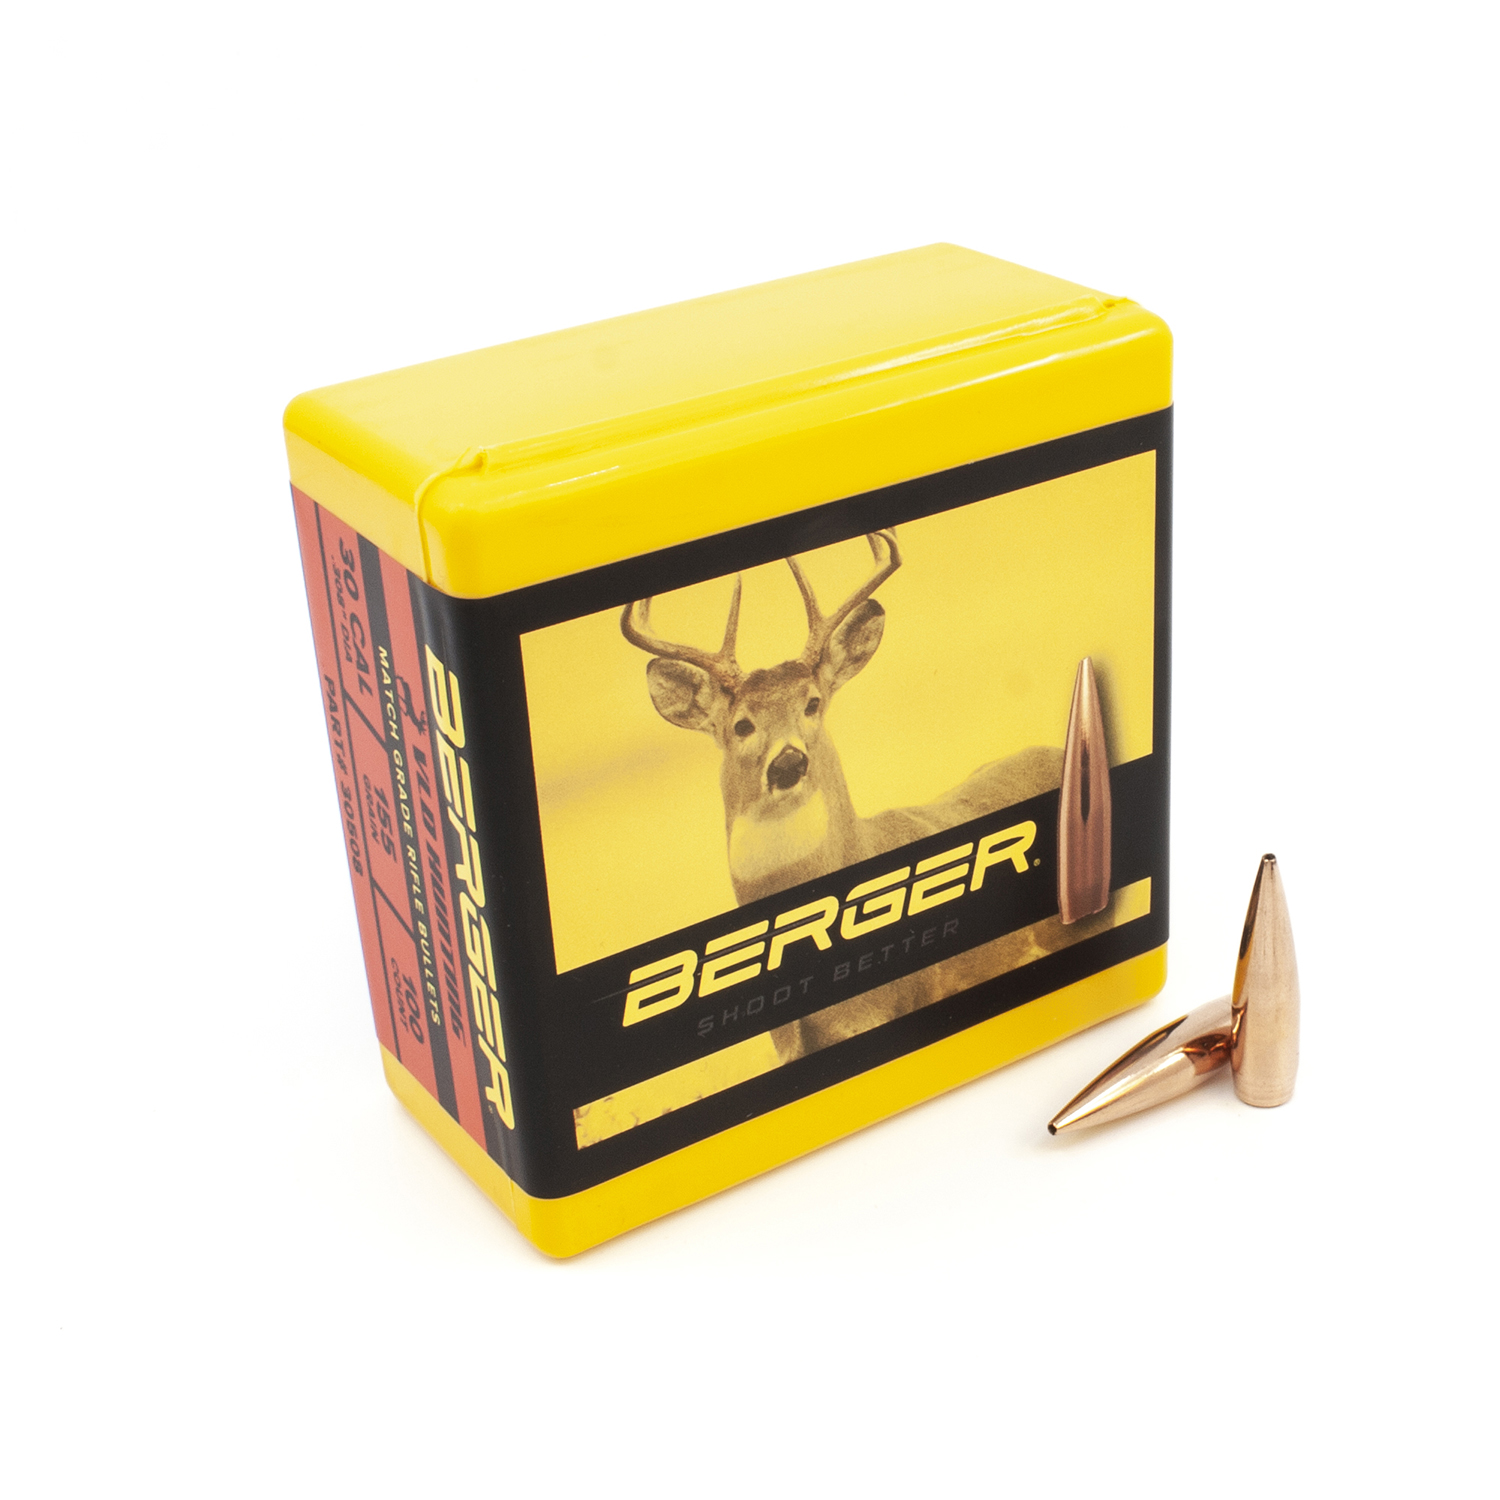 Berger 30cal 155gr VLD Hunting 100ct